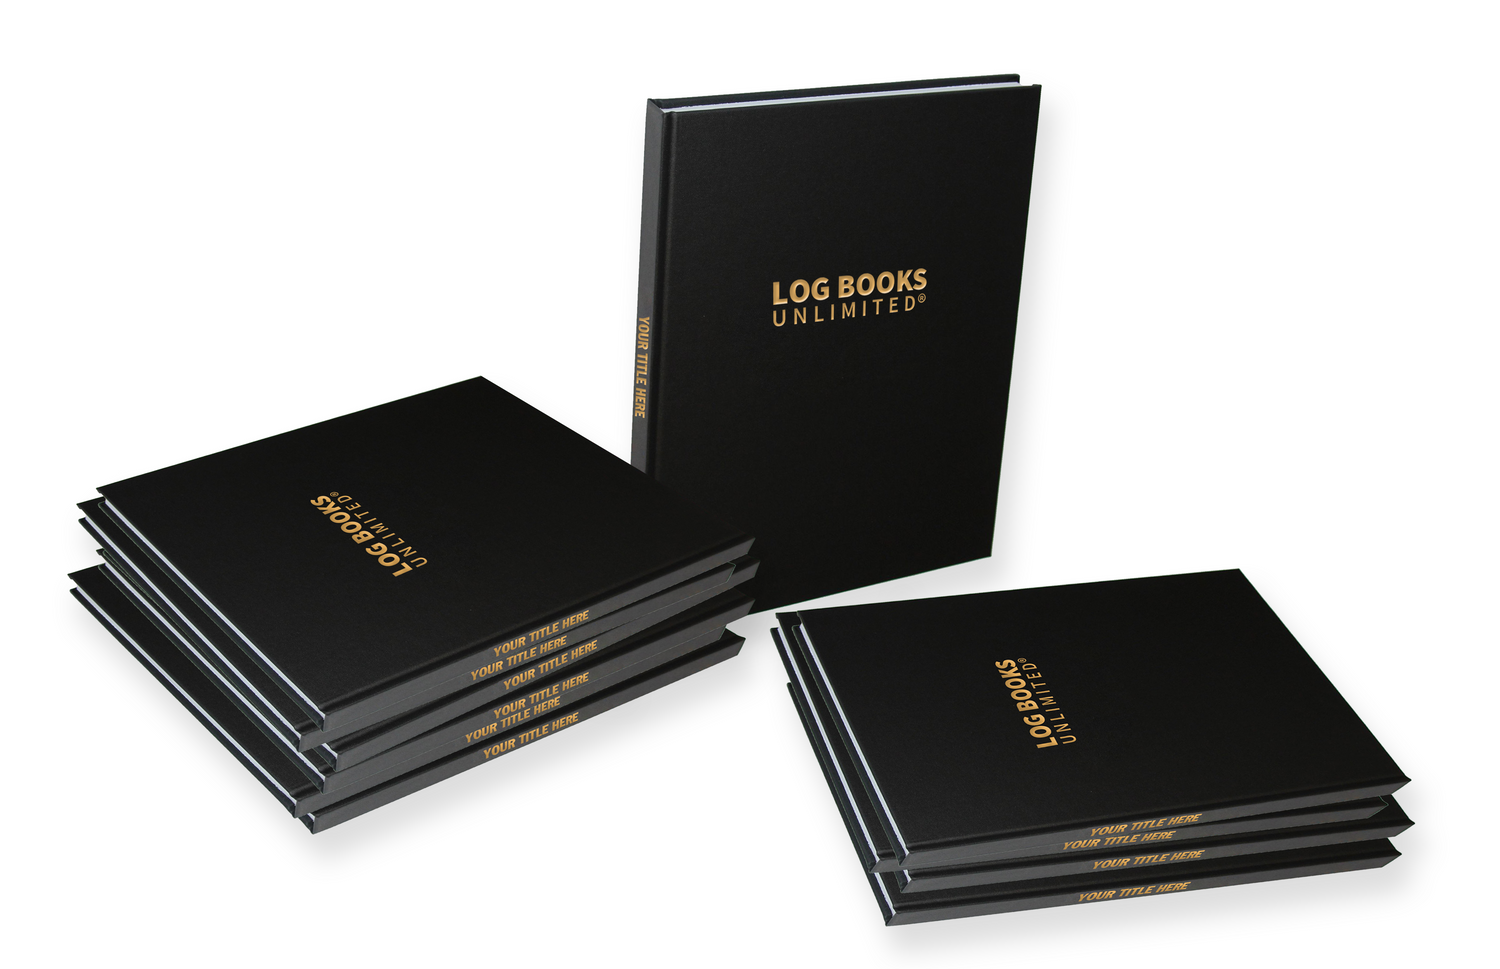 Black cover log books with log books unlimited text on the front cover.